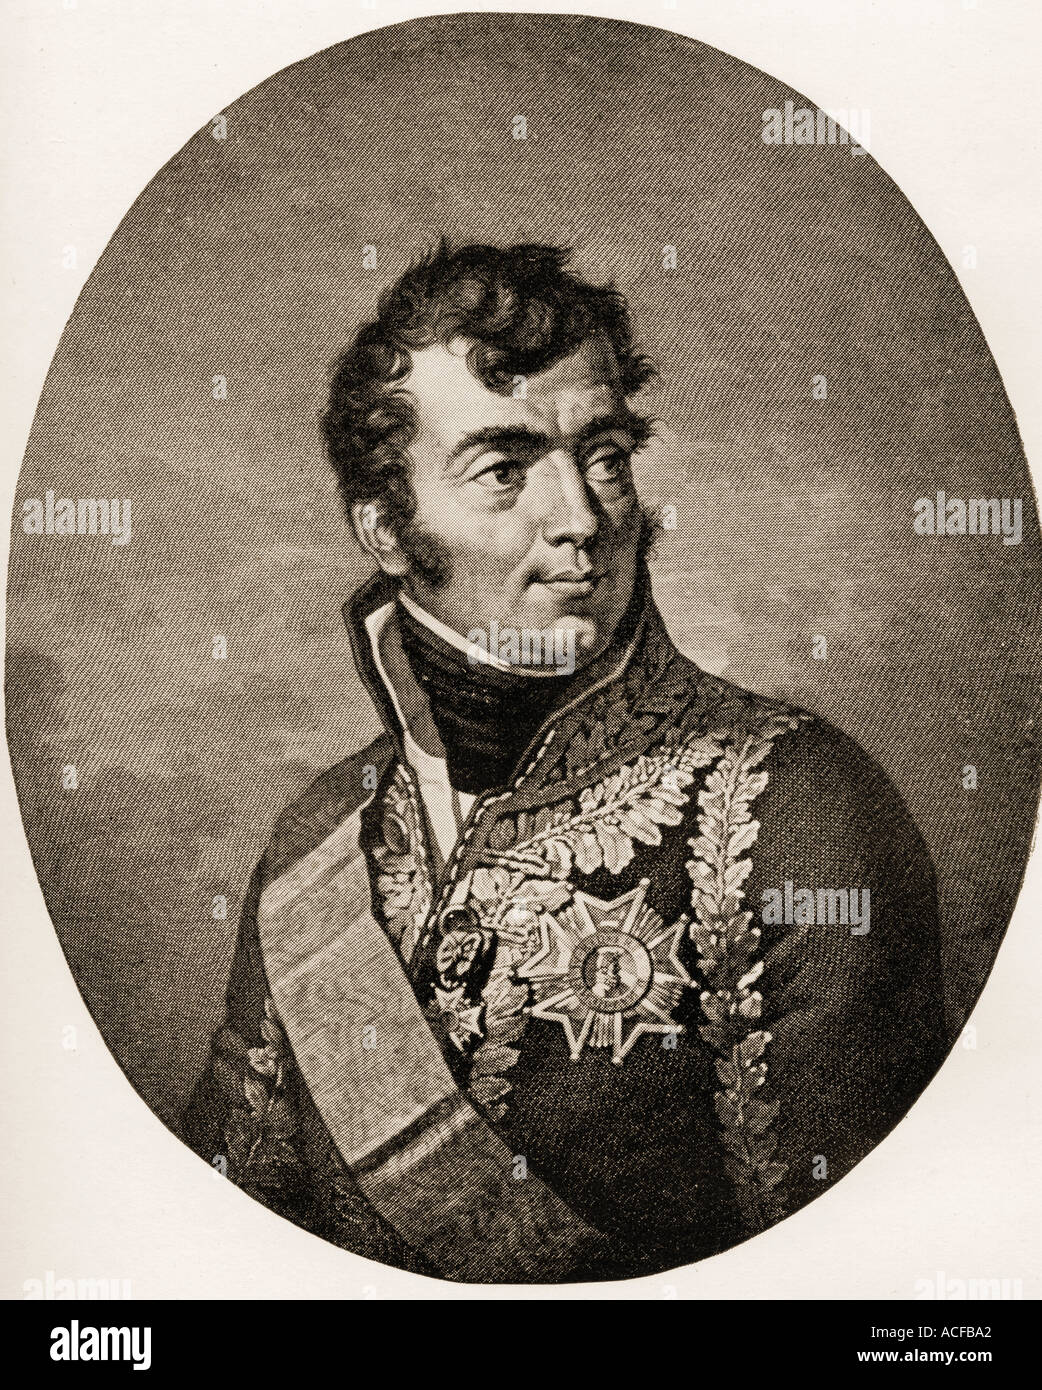 Auguste Frédéric Louis Viesse de Marmont, Duke of Ragusa, 1774 - 1852. French Marshal.  From an engraving after the painting by Maneret Stock Photo